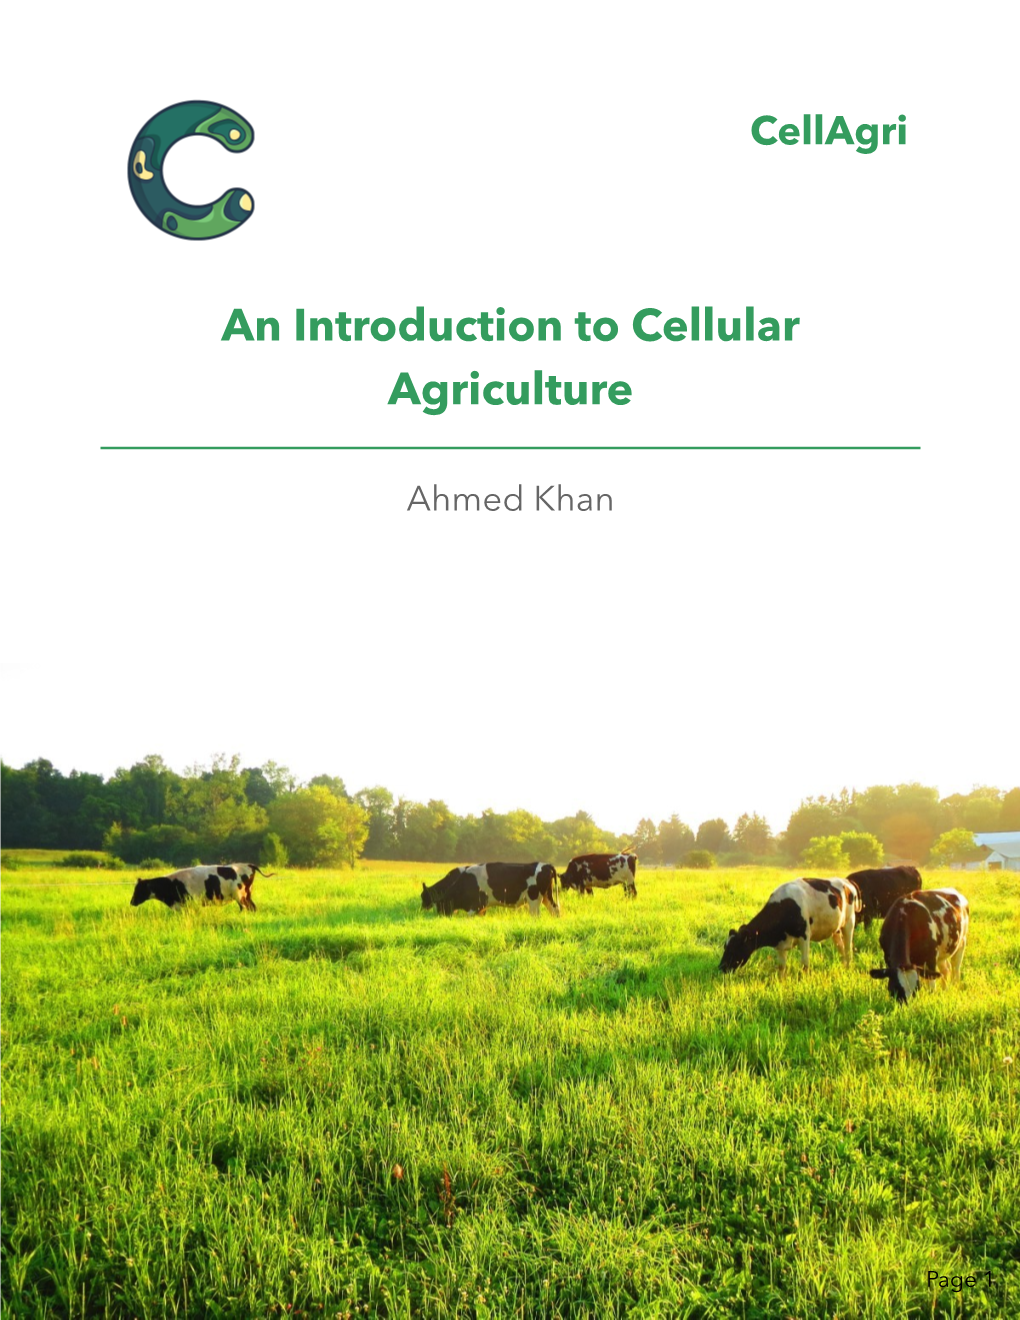 An Introduction to Cellular Agriculture